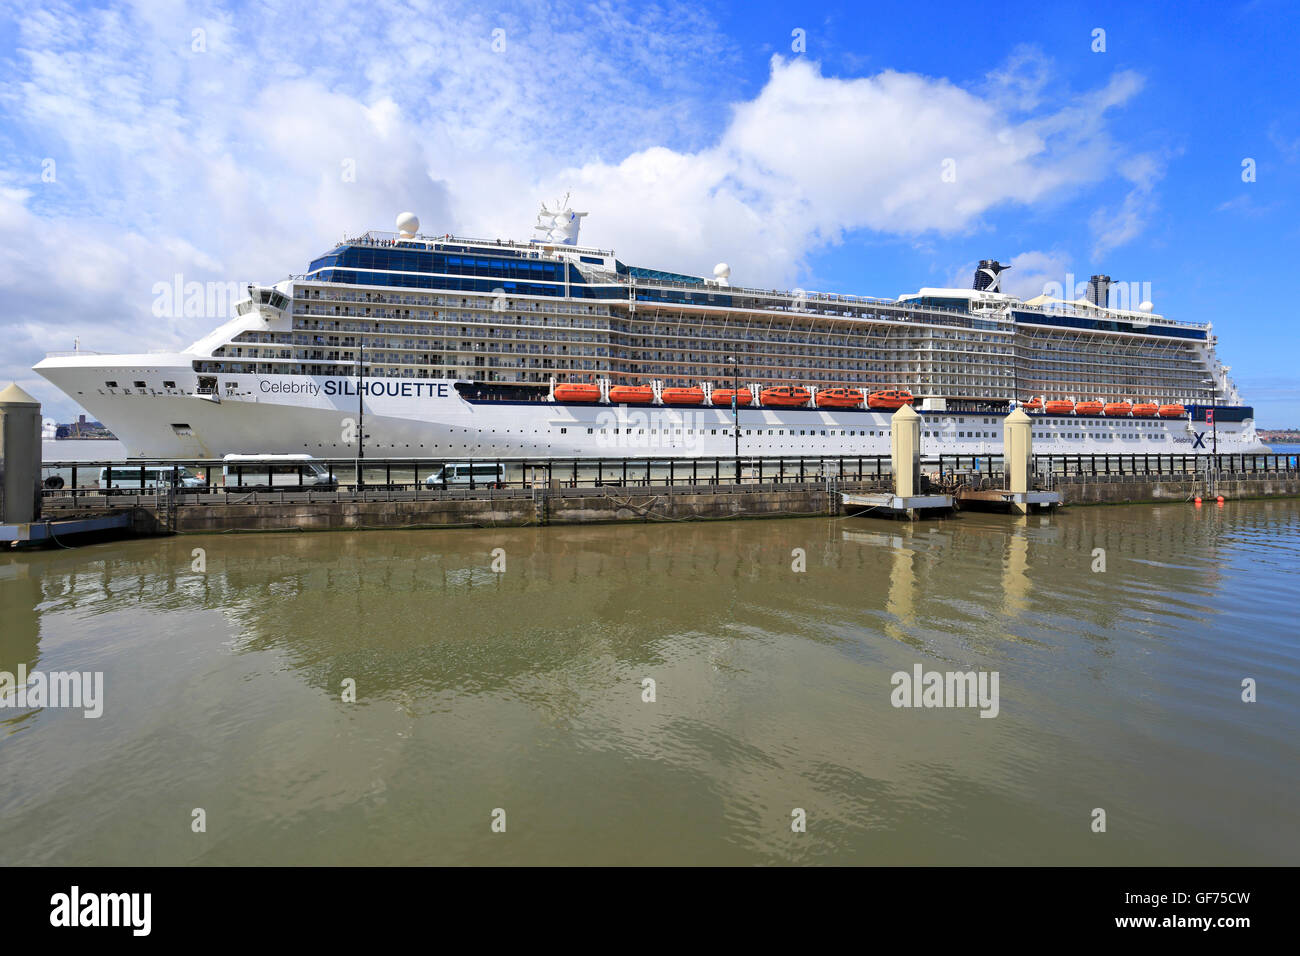 Celebrity Silhouette Cruise ship at the terminal, Liverpool, Merseyside, England, UK. Stock Photo